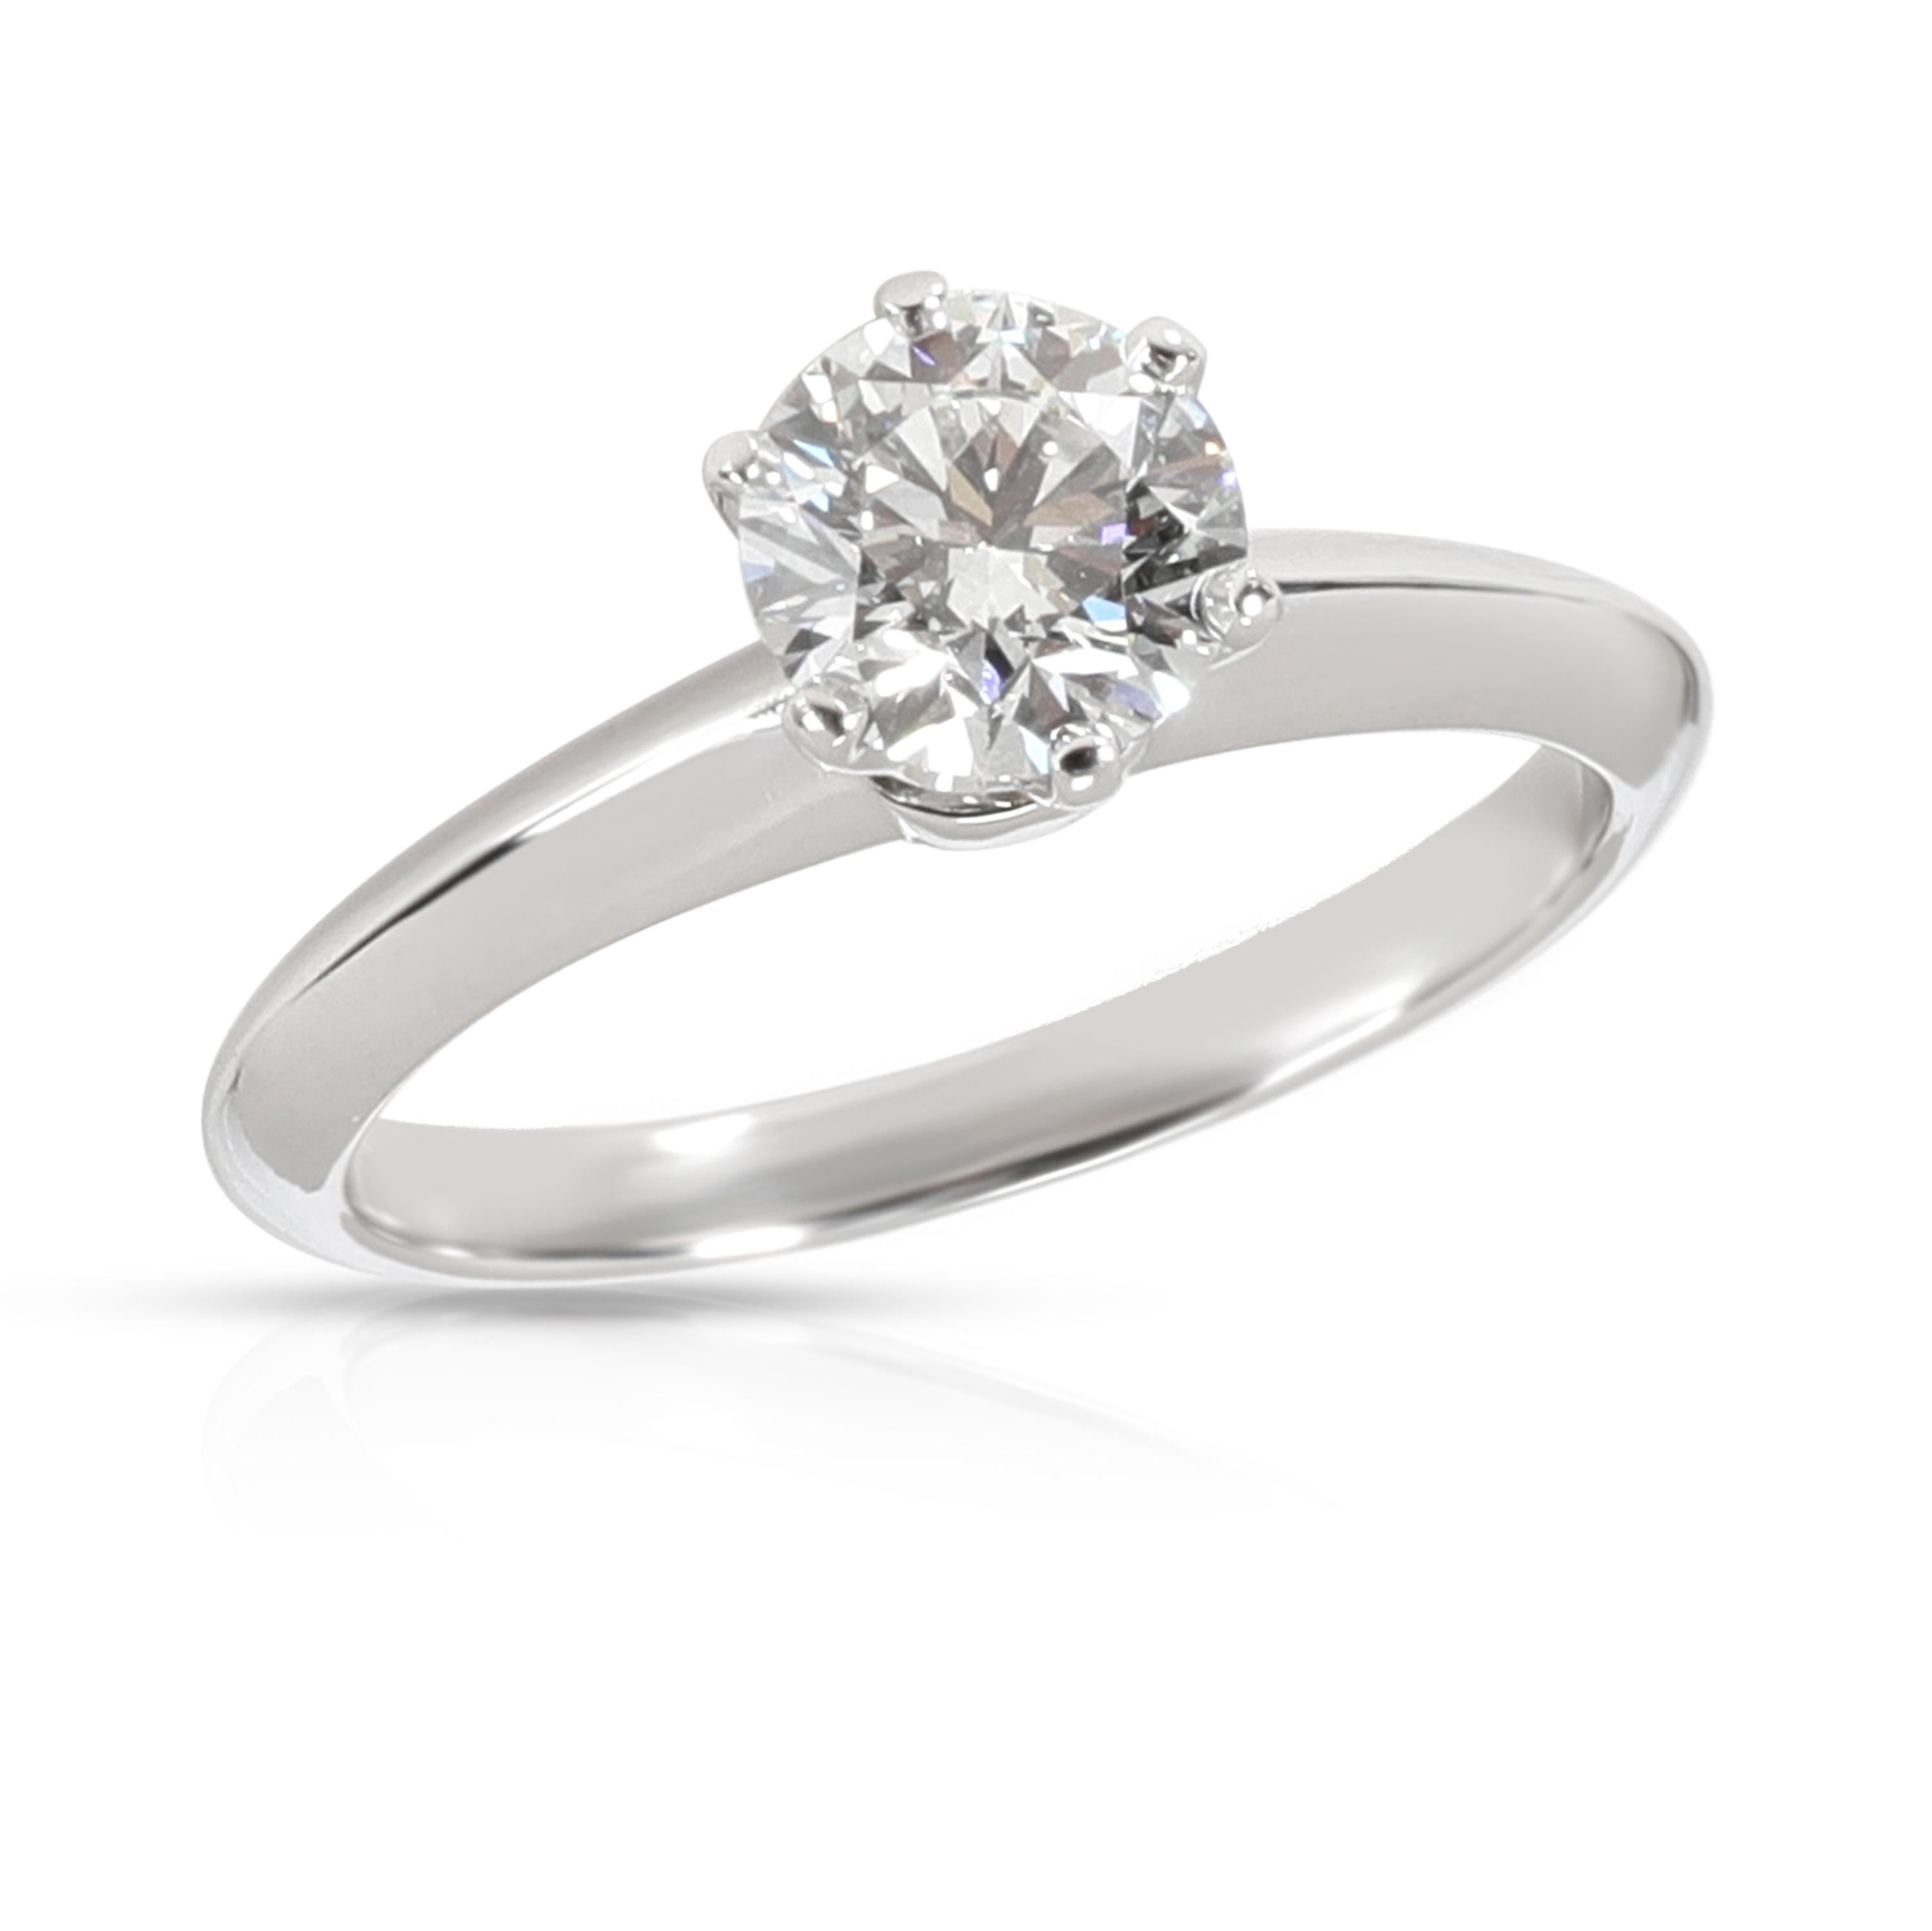 Round Cut Tiffany & Co. Solitaire Diamond Engagement Ring in Platinum G IF 0.92 Carat